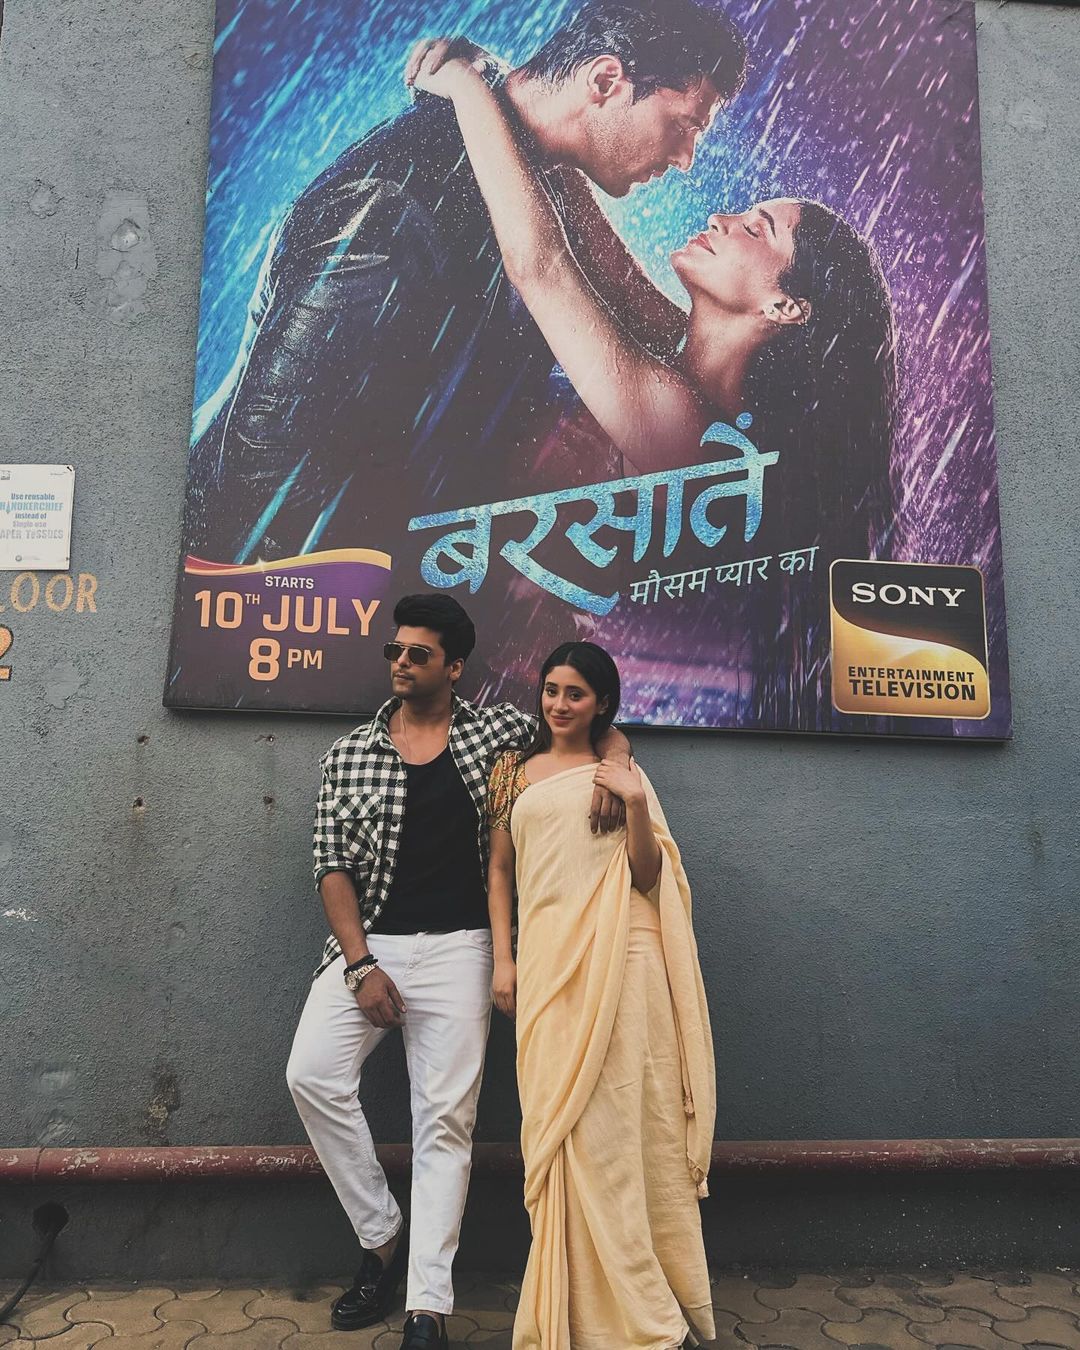 Charming Actress Shivangi Joshi Shared Cute Pictures With Handsome Actor Kushal Tandon From Barsatein Shoot. She Called Him ‘An Incredible Partner In This Journey’!